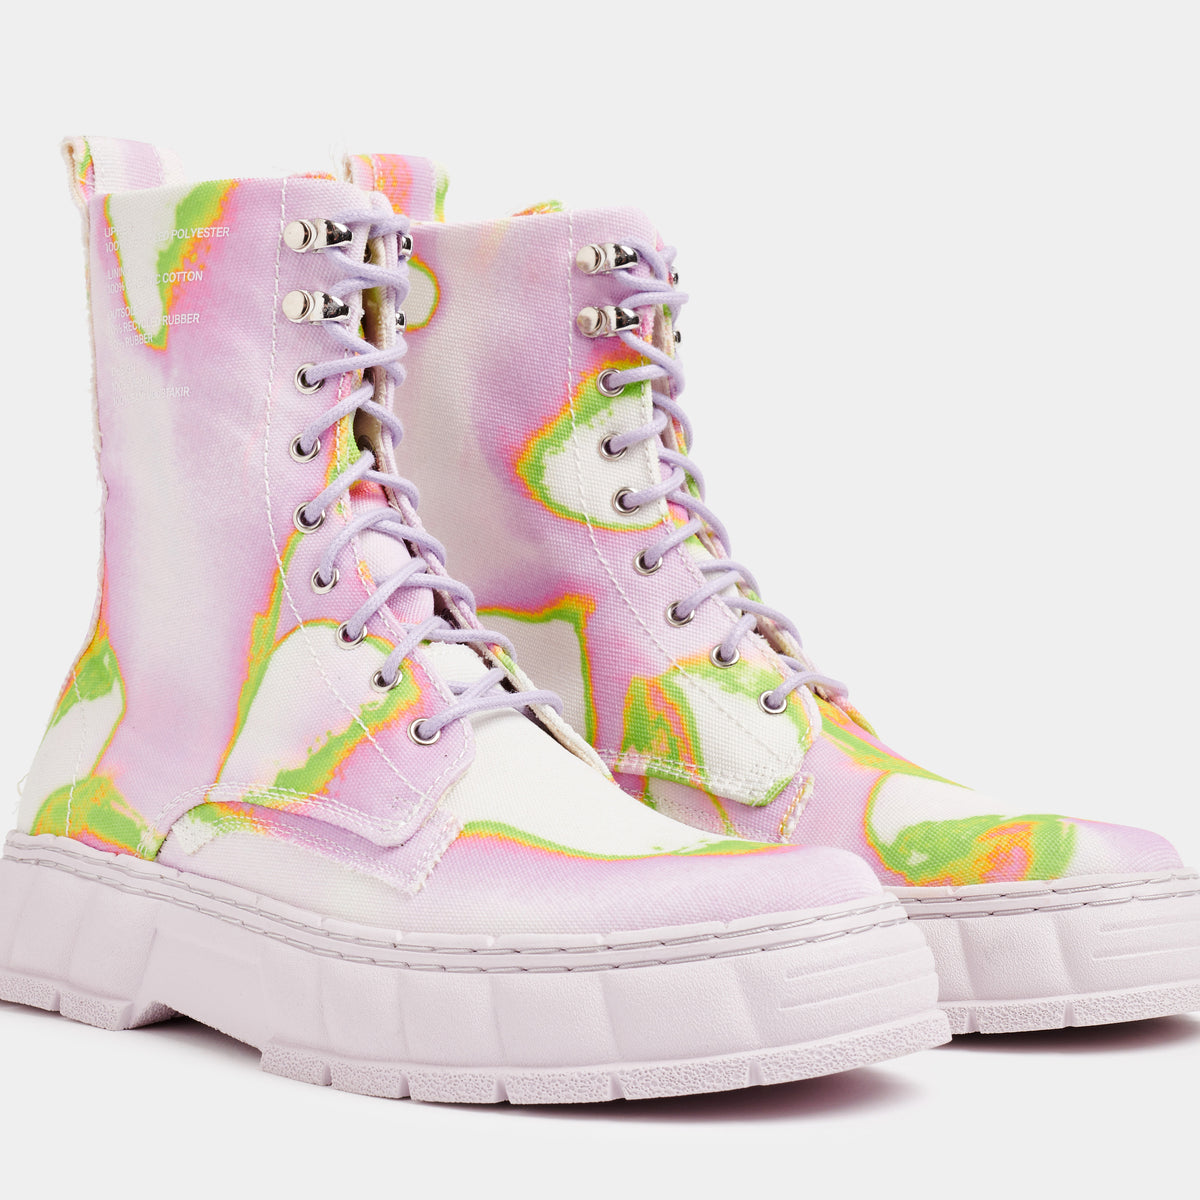 1992 Vegan combat boot made from recycled PET in pink and green shown from the front